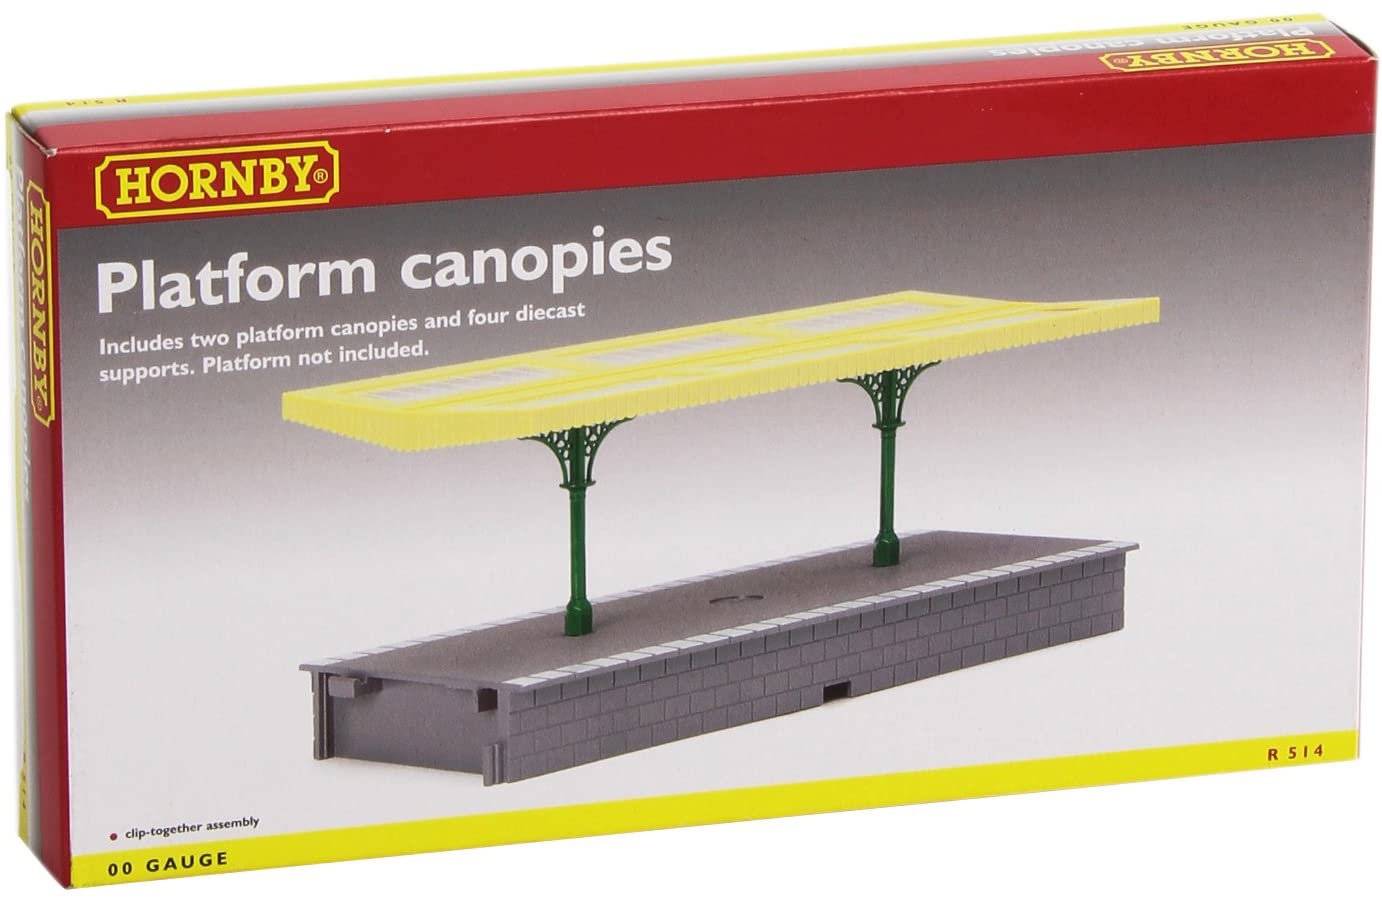 R514U HORNBY Station Platform Canopies (used) - BOXED